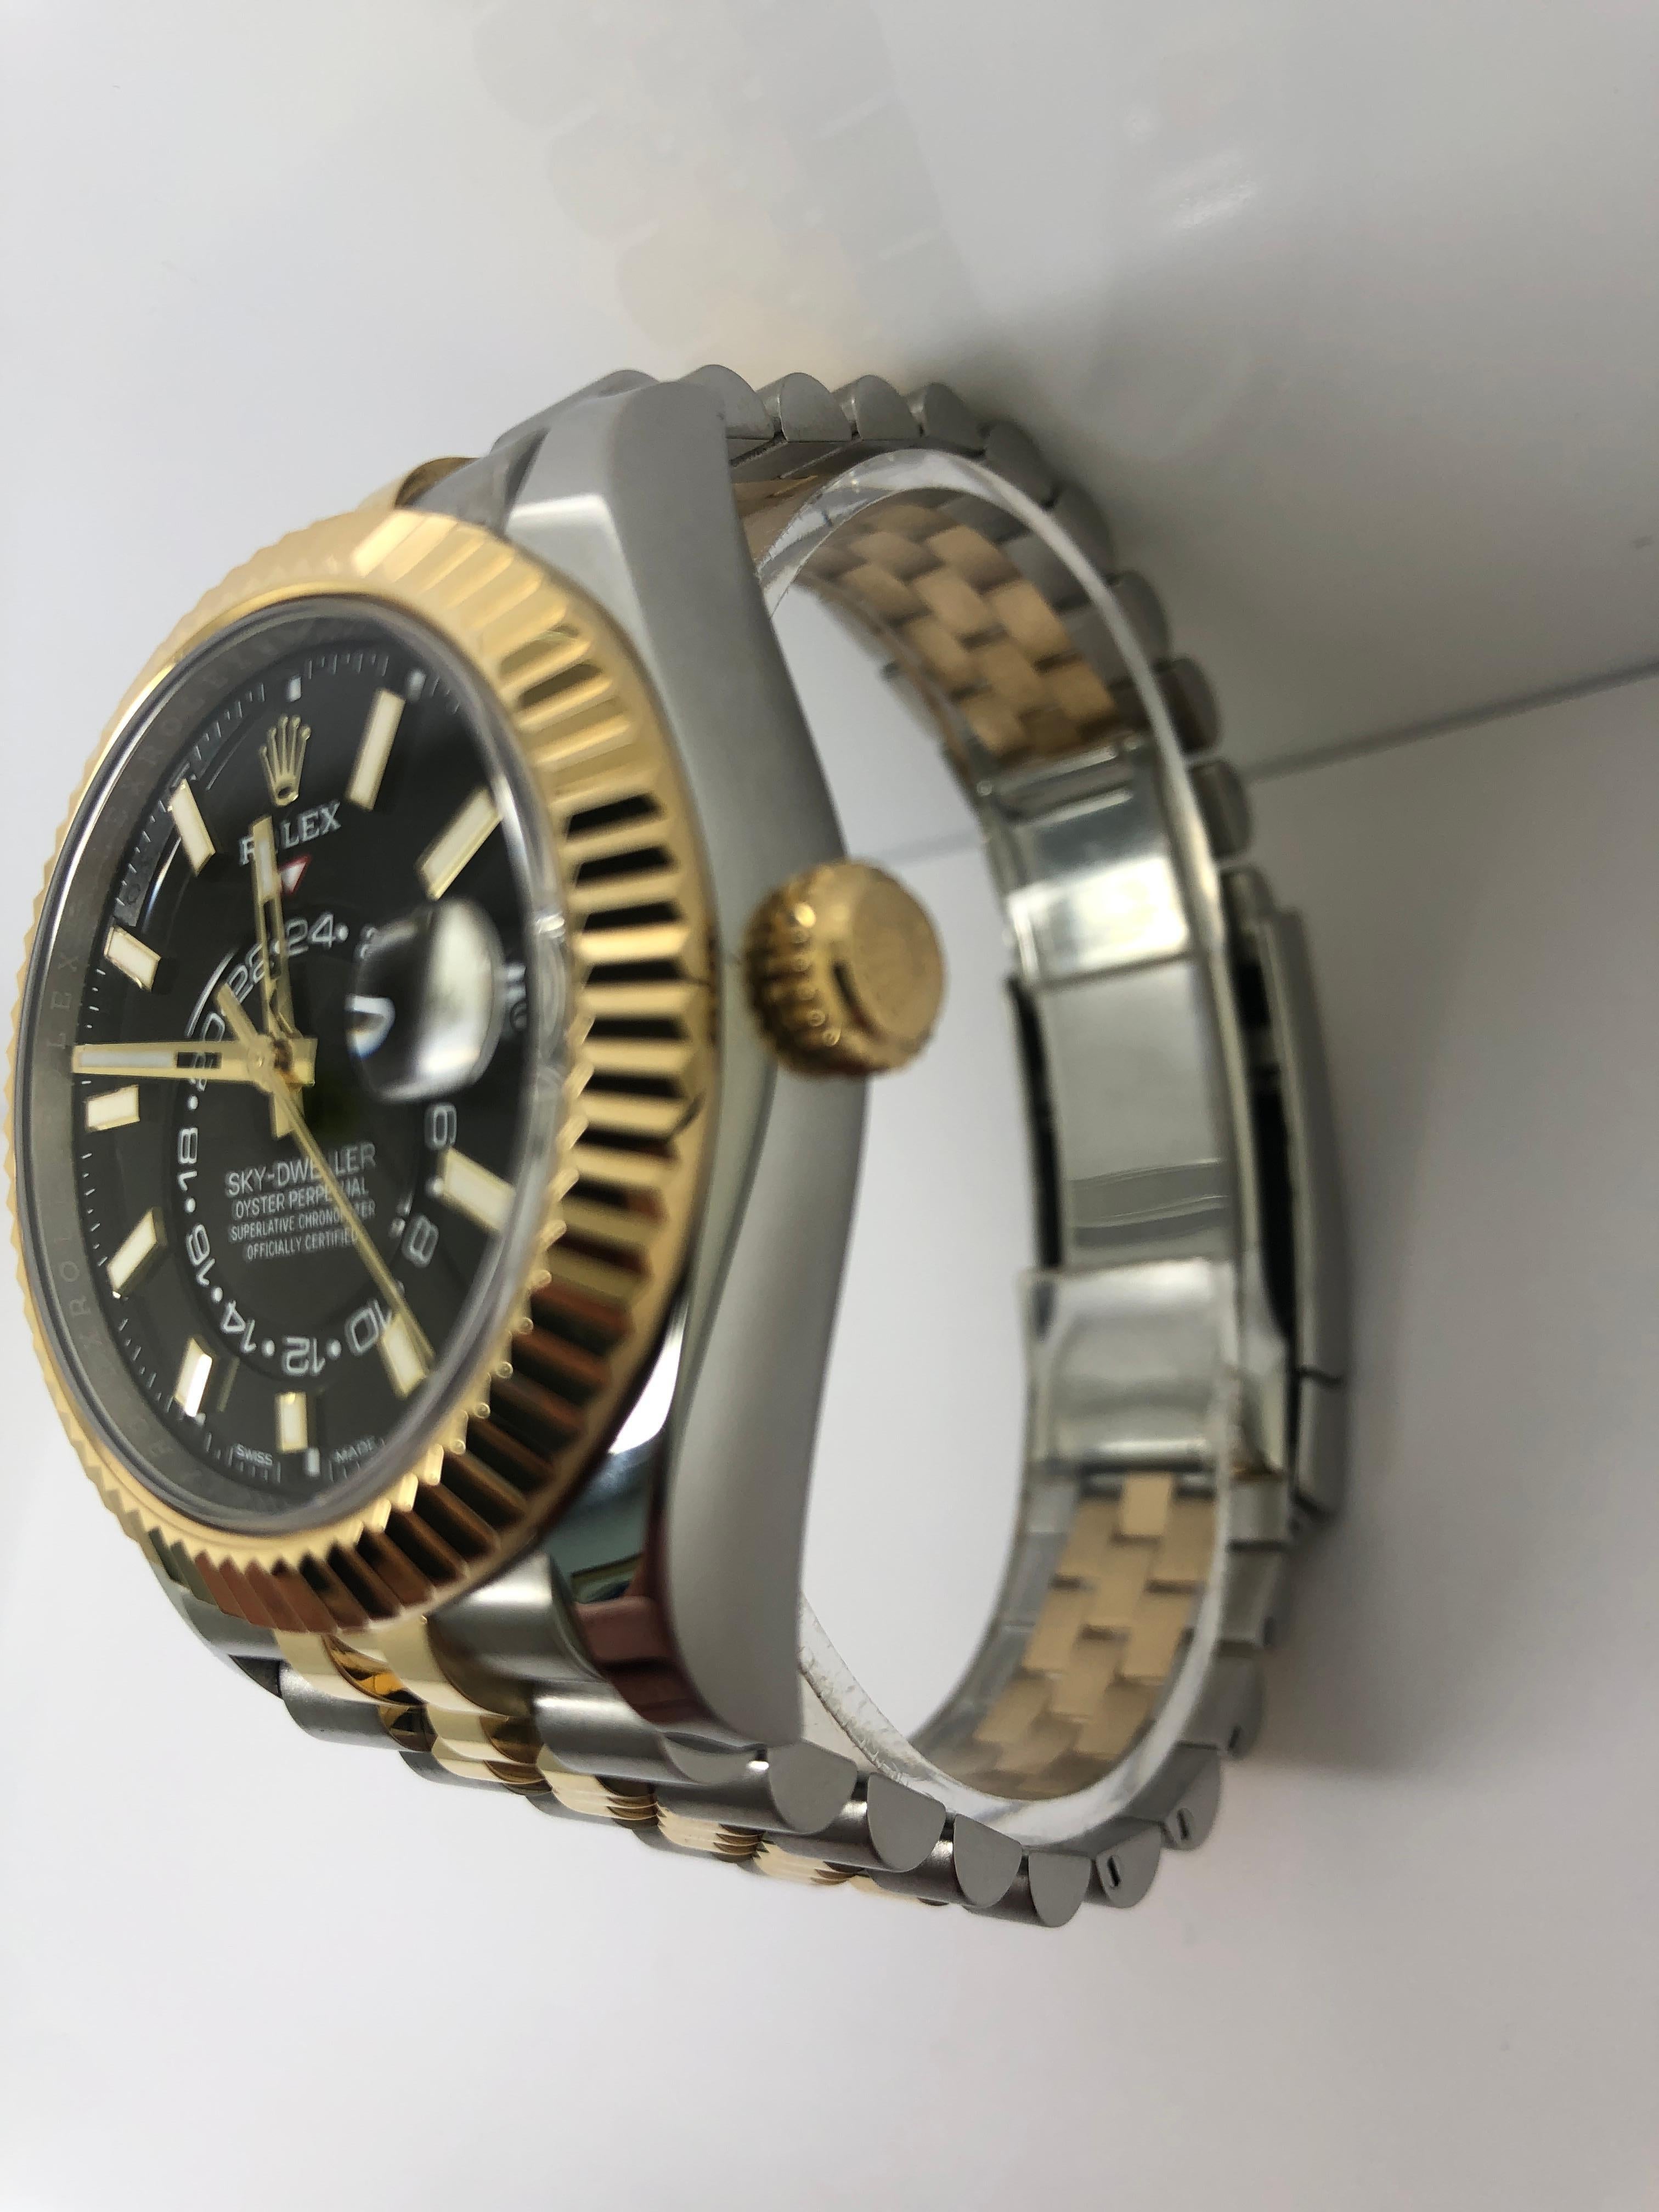 New Men's Rolex Skydweller two tone jubilee bracelet

box papers

free overnight shipping

shop with confidence 

